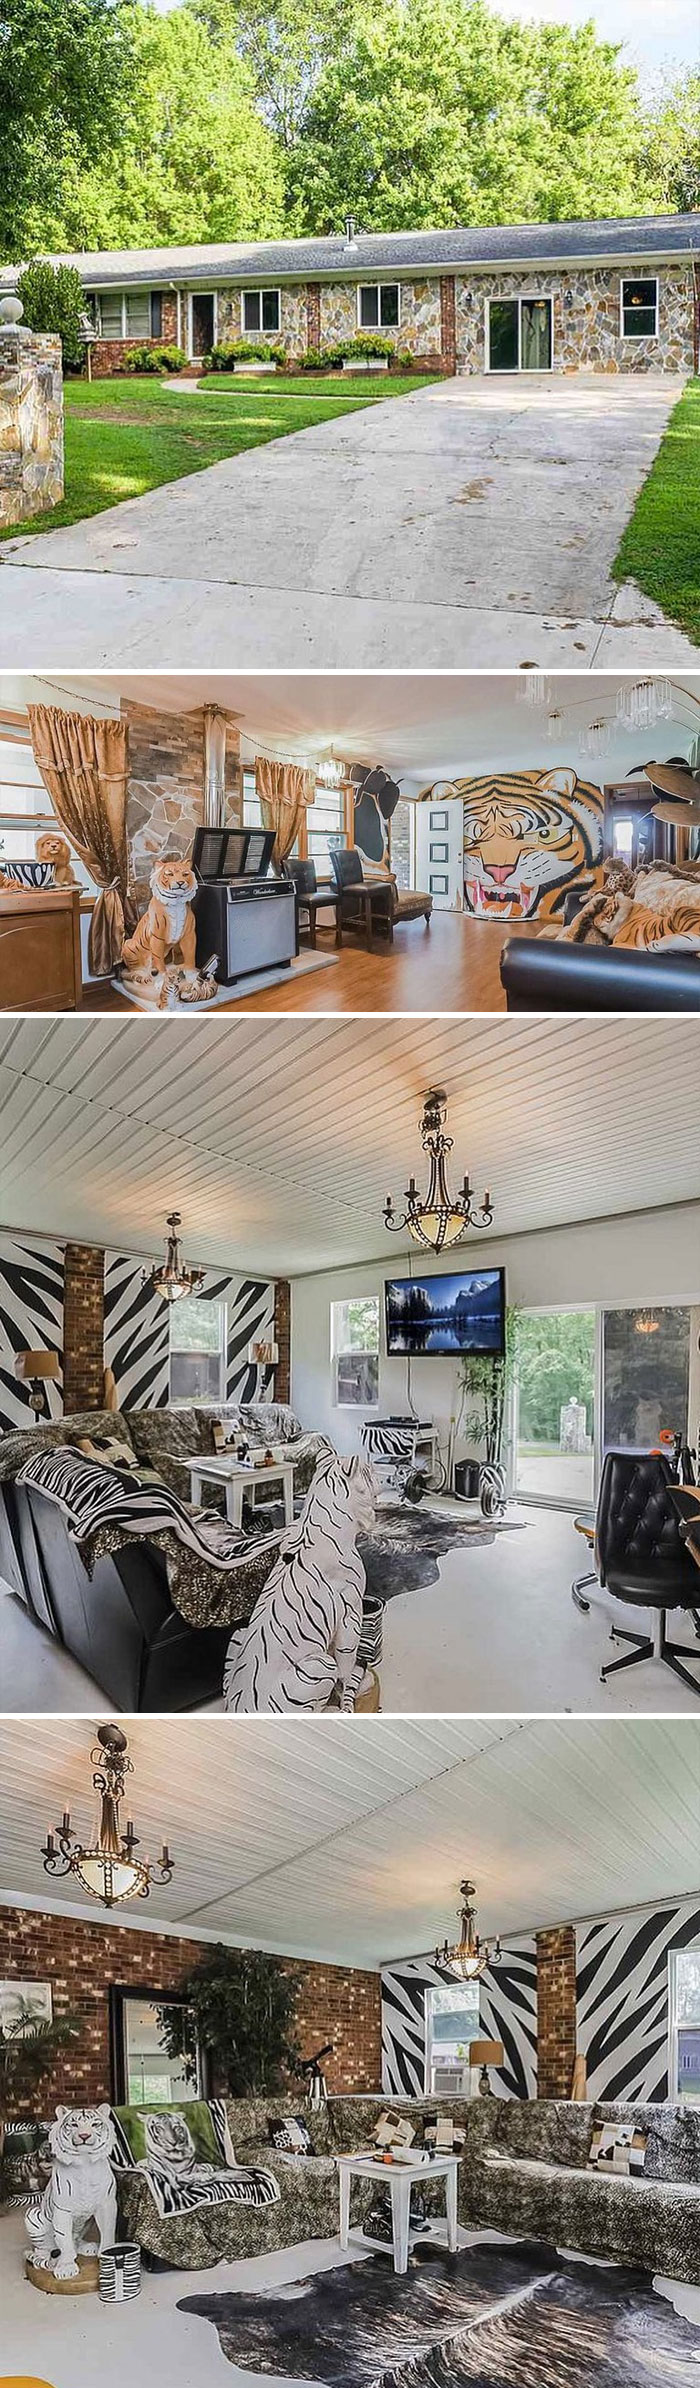 The Tiger King House. $307,000